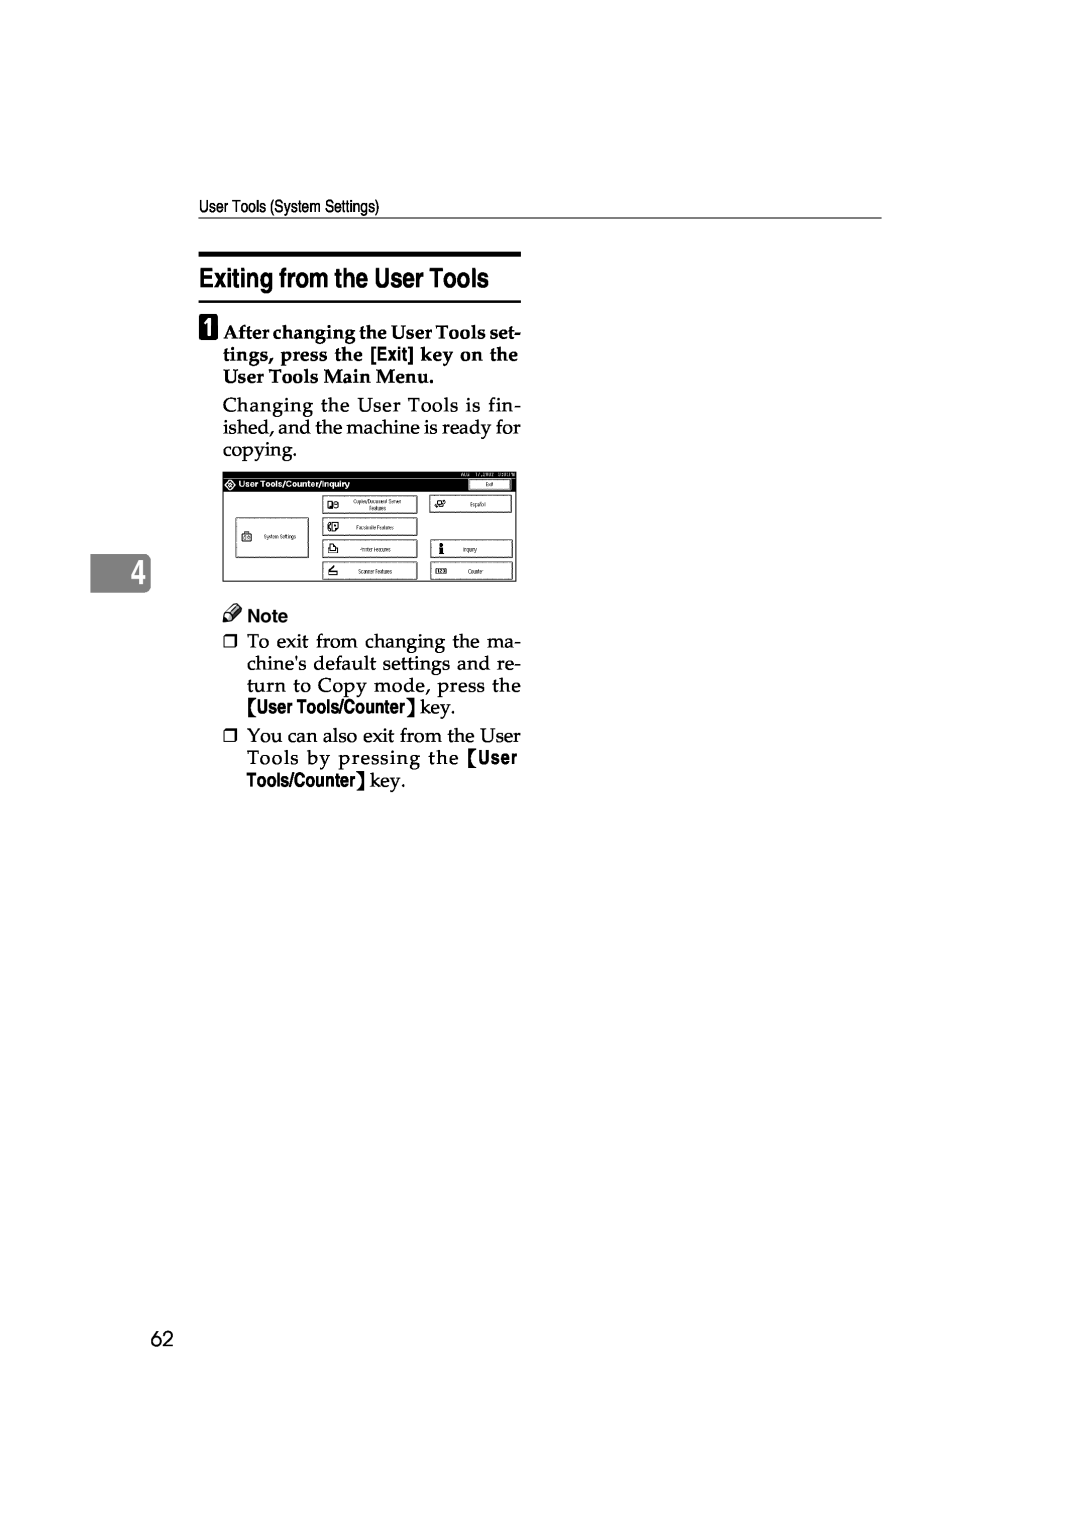 Lanier 5627 AG, 5622 AG manual Exiting from the User Tools, User Tools/Counter key, User Tools System Settings 